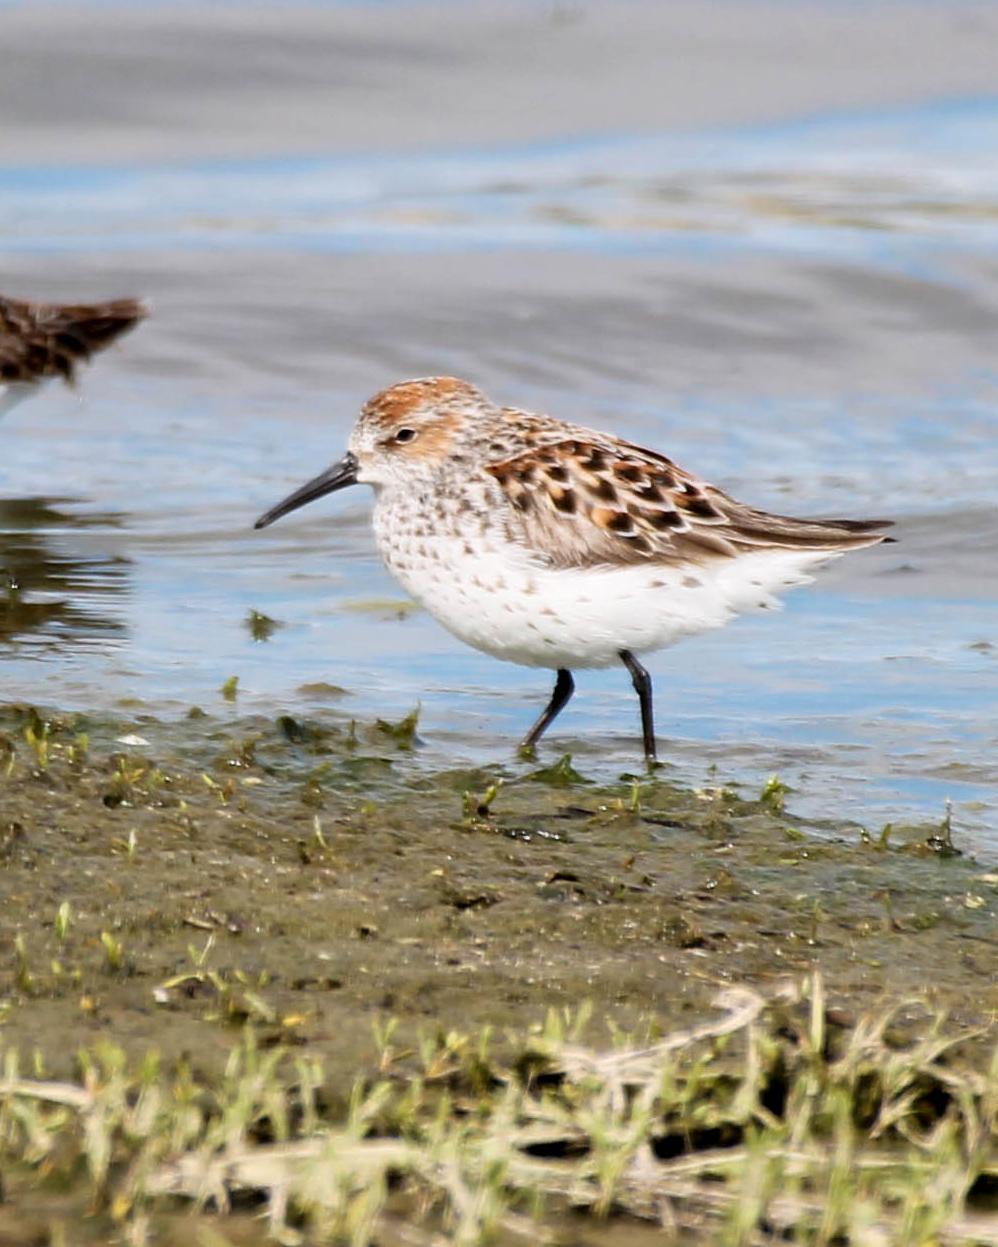 Western Sandpiper Photo by Dylan Hopkins